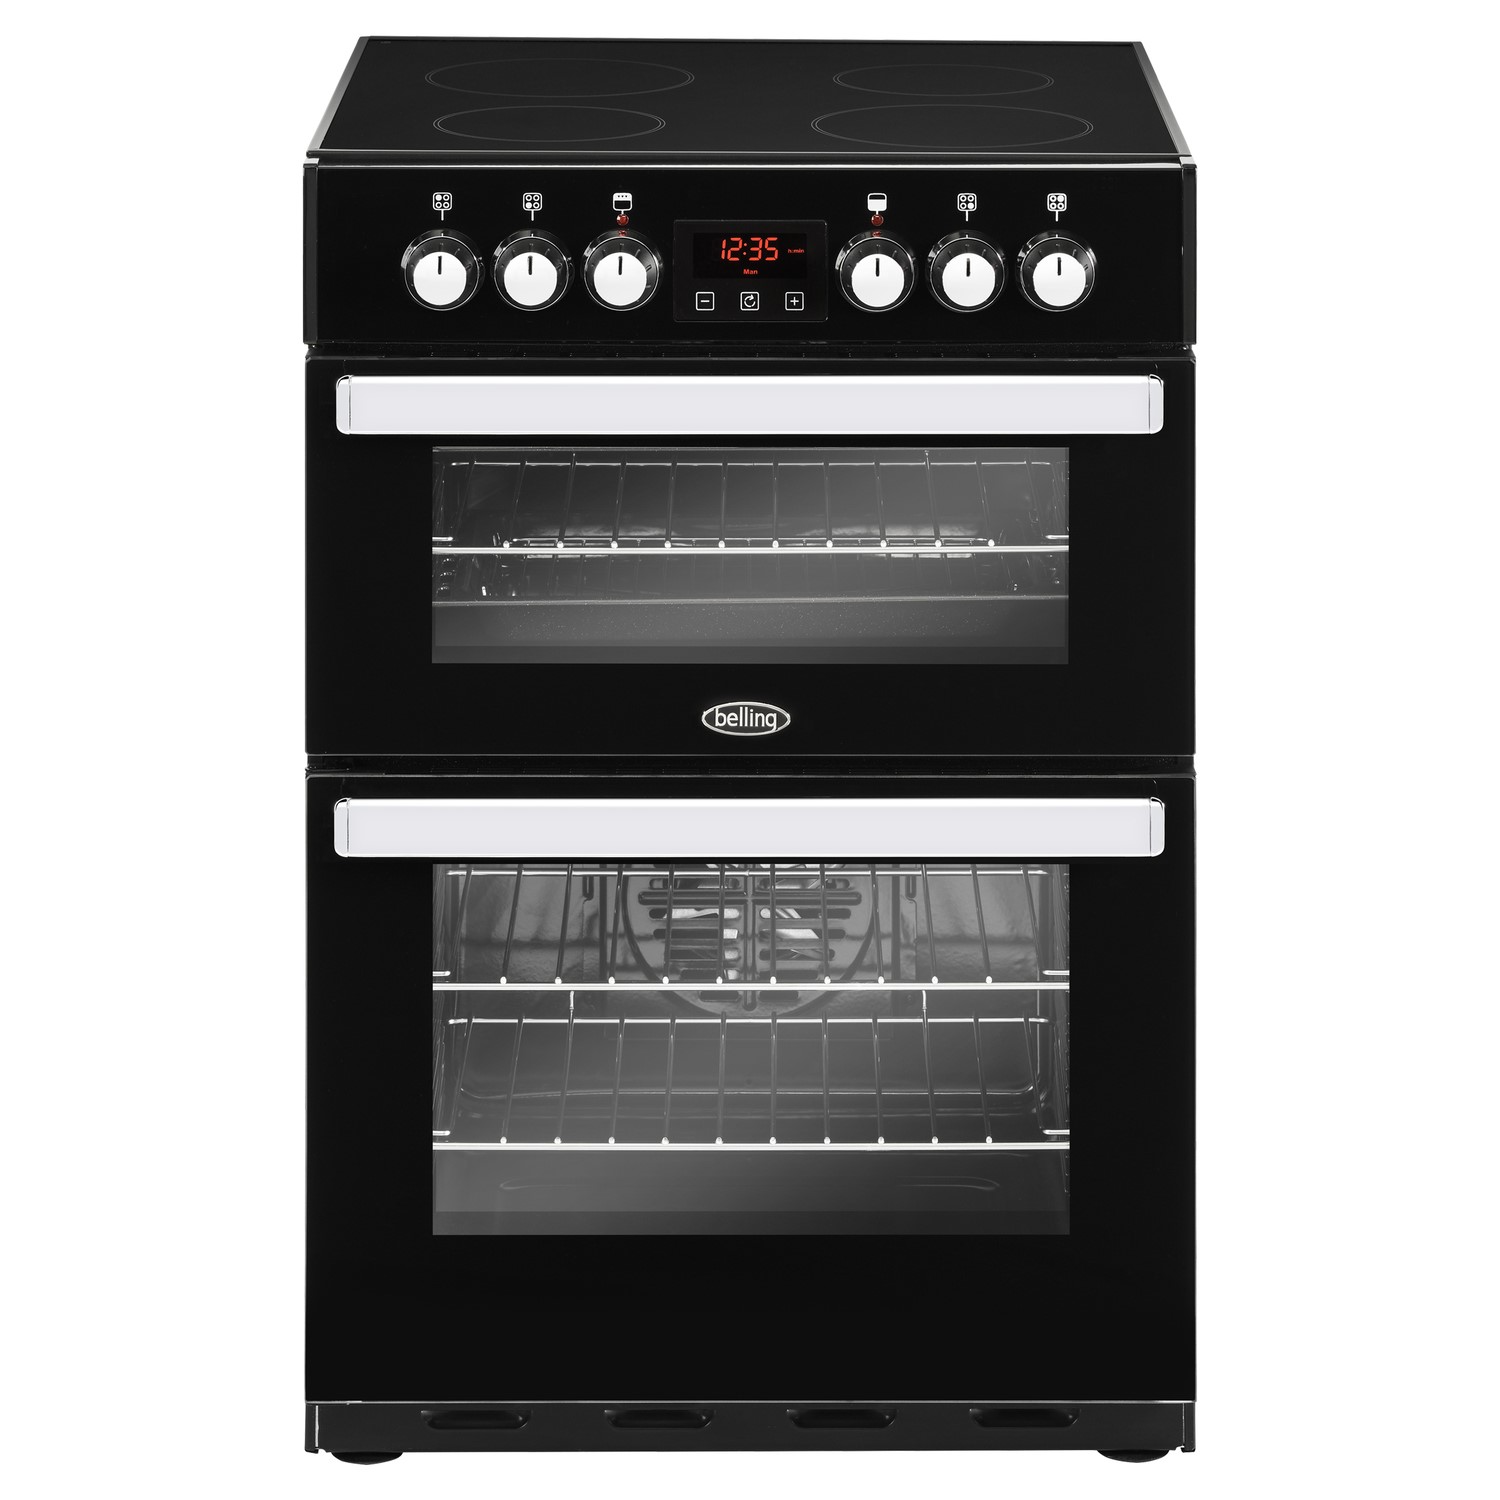 Belling Cookcentre 60E 60cm Double Oven Electric Cooker with Ceramic Hob - Black